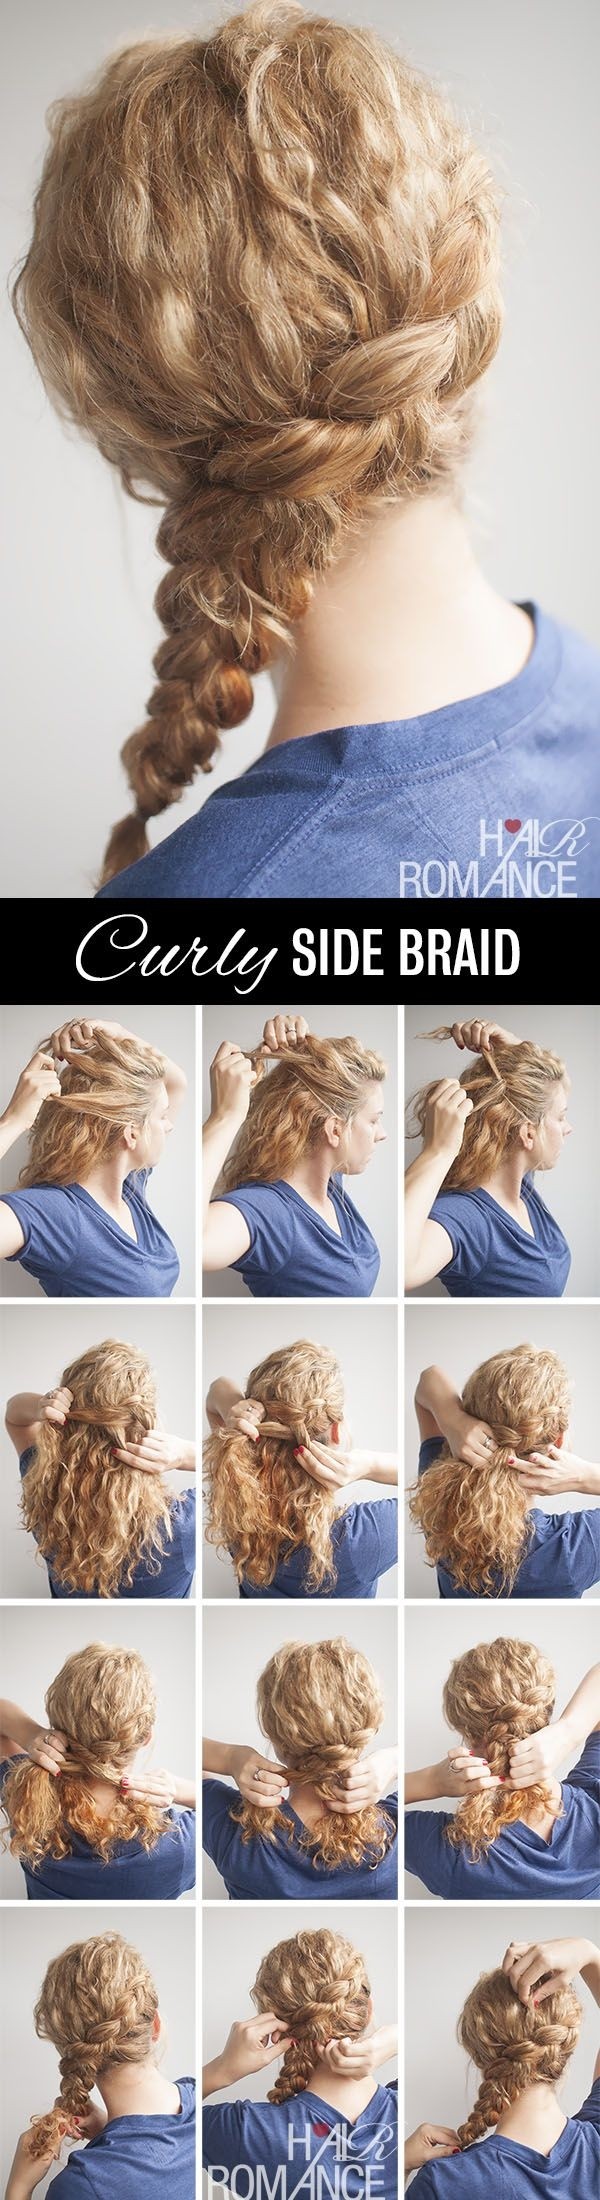 Side Braid Hairstyle Tutorial for Curly Hair